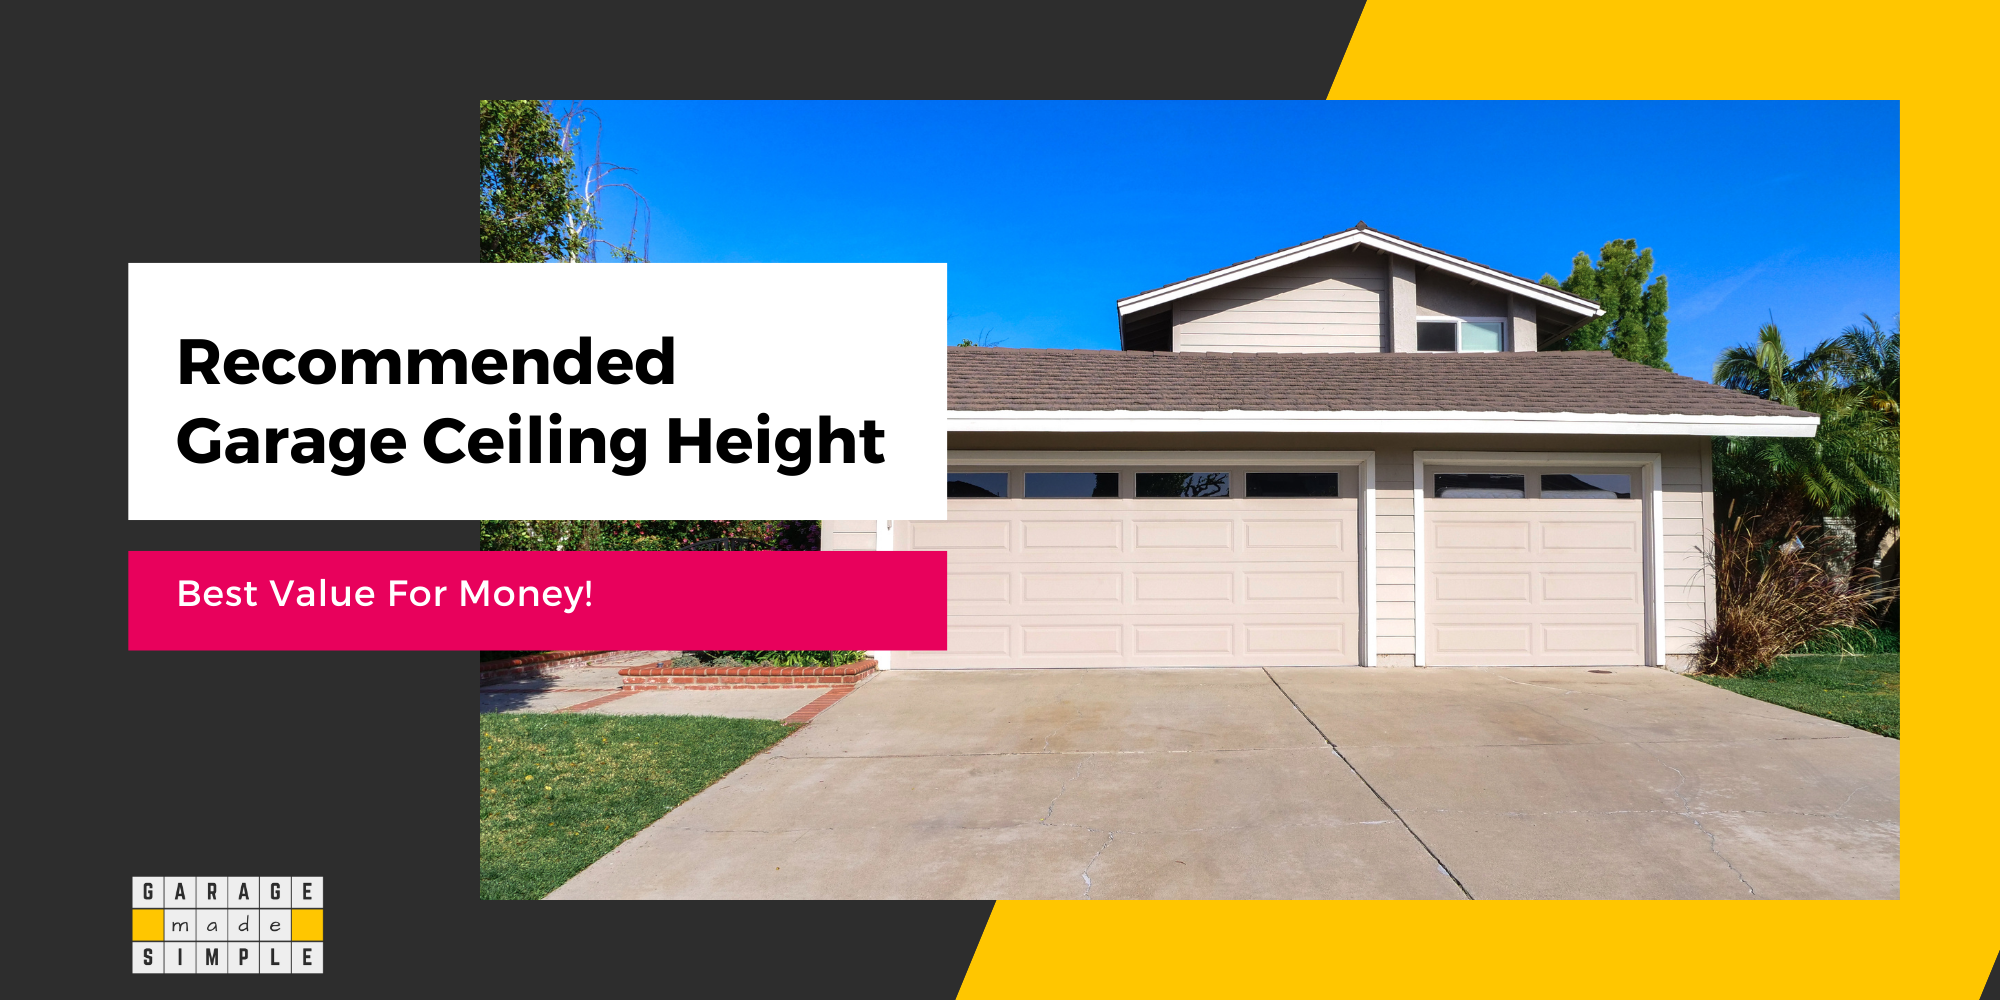 Recommended Garage Ceiling Height: What is Best Value For Money?